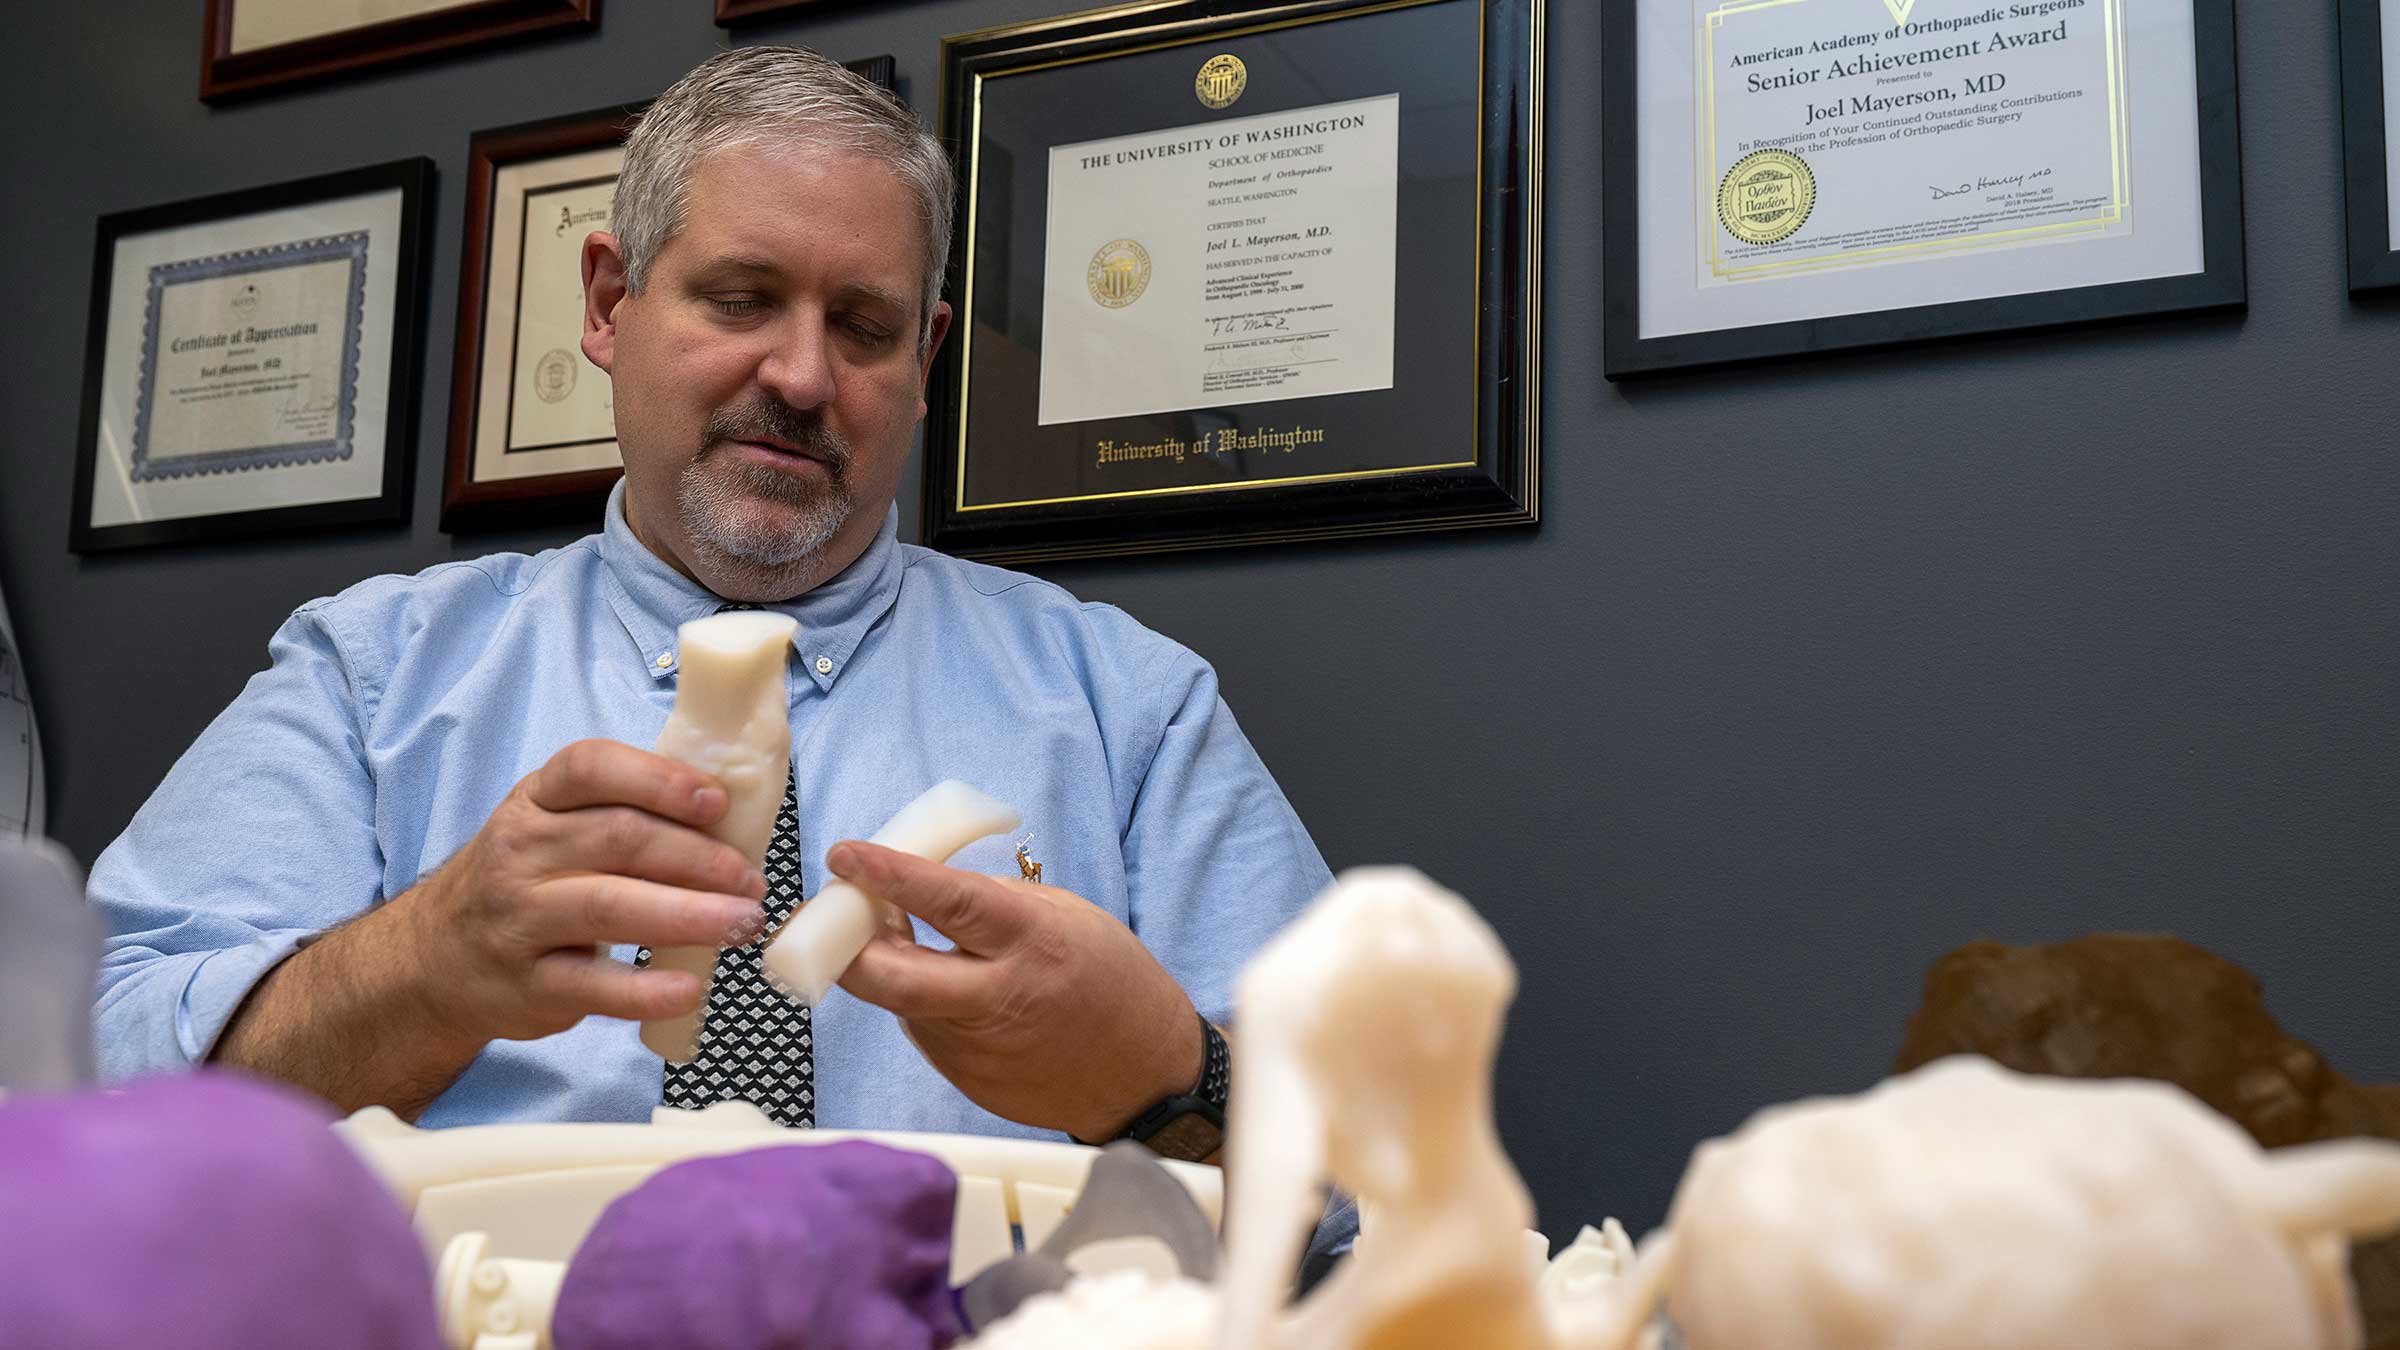 Dr. Mayerson holding 3D printed models in his hands